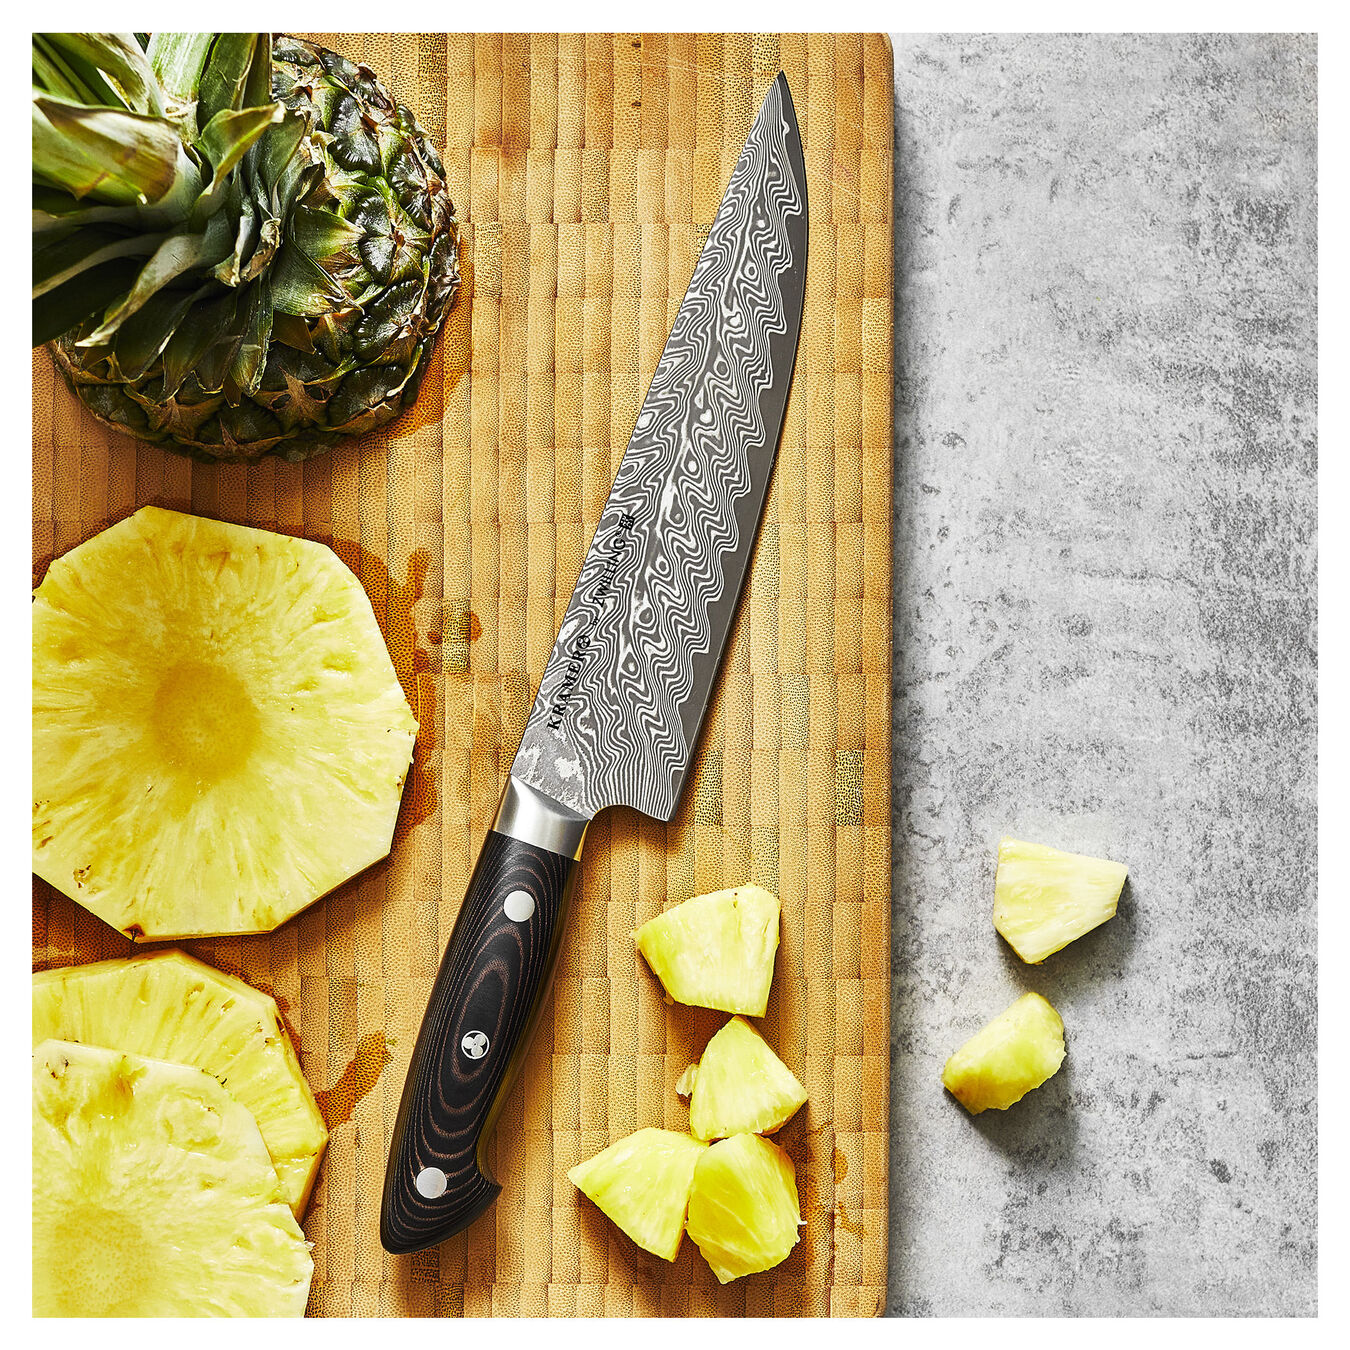 8-inch, Narrow Chef's Knife,,large 6